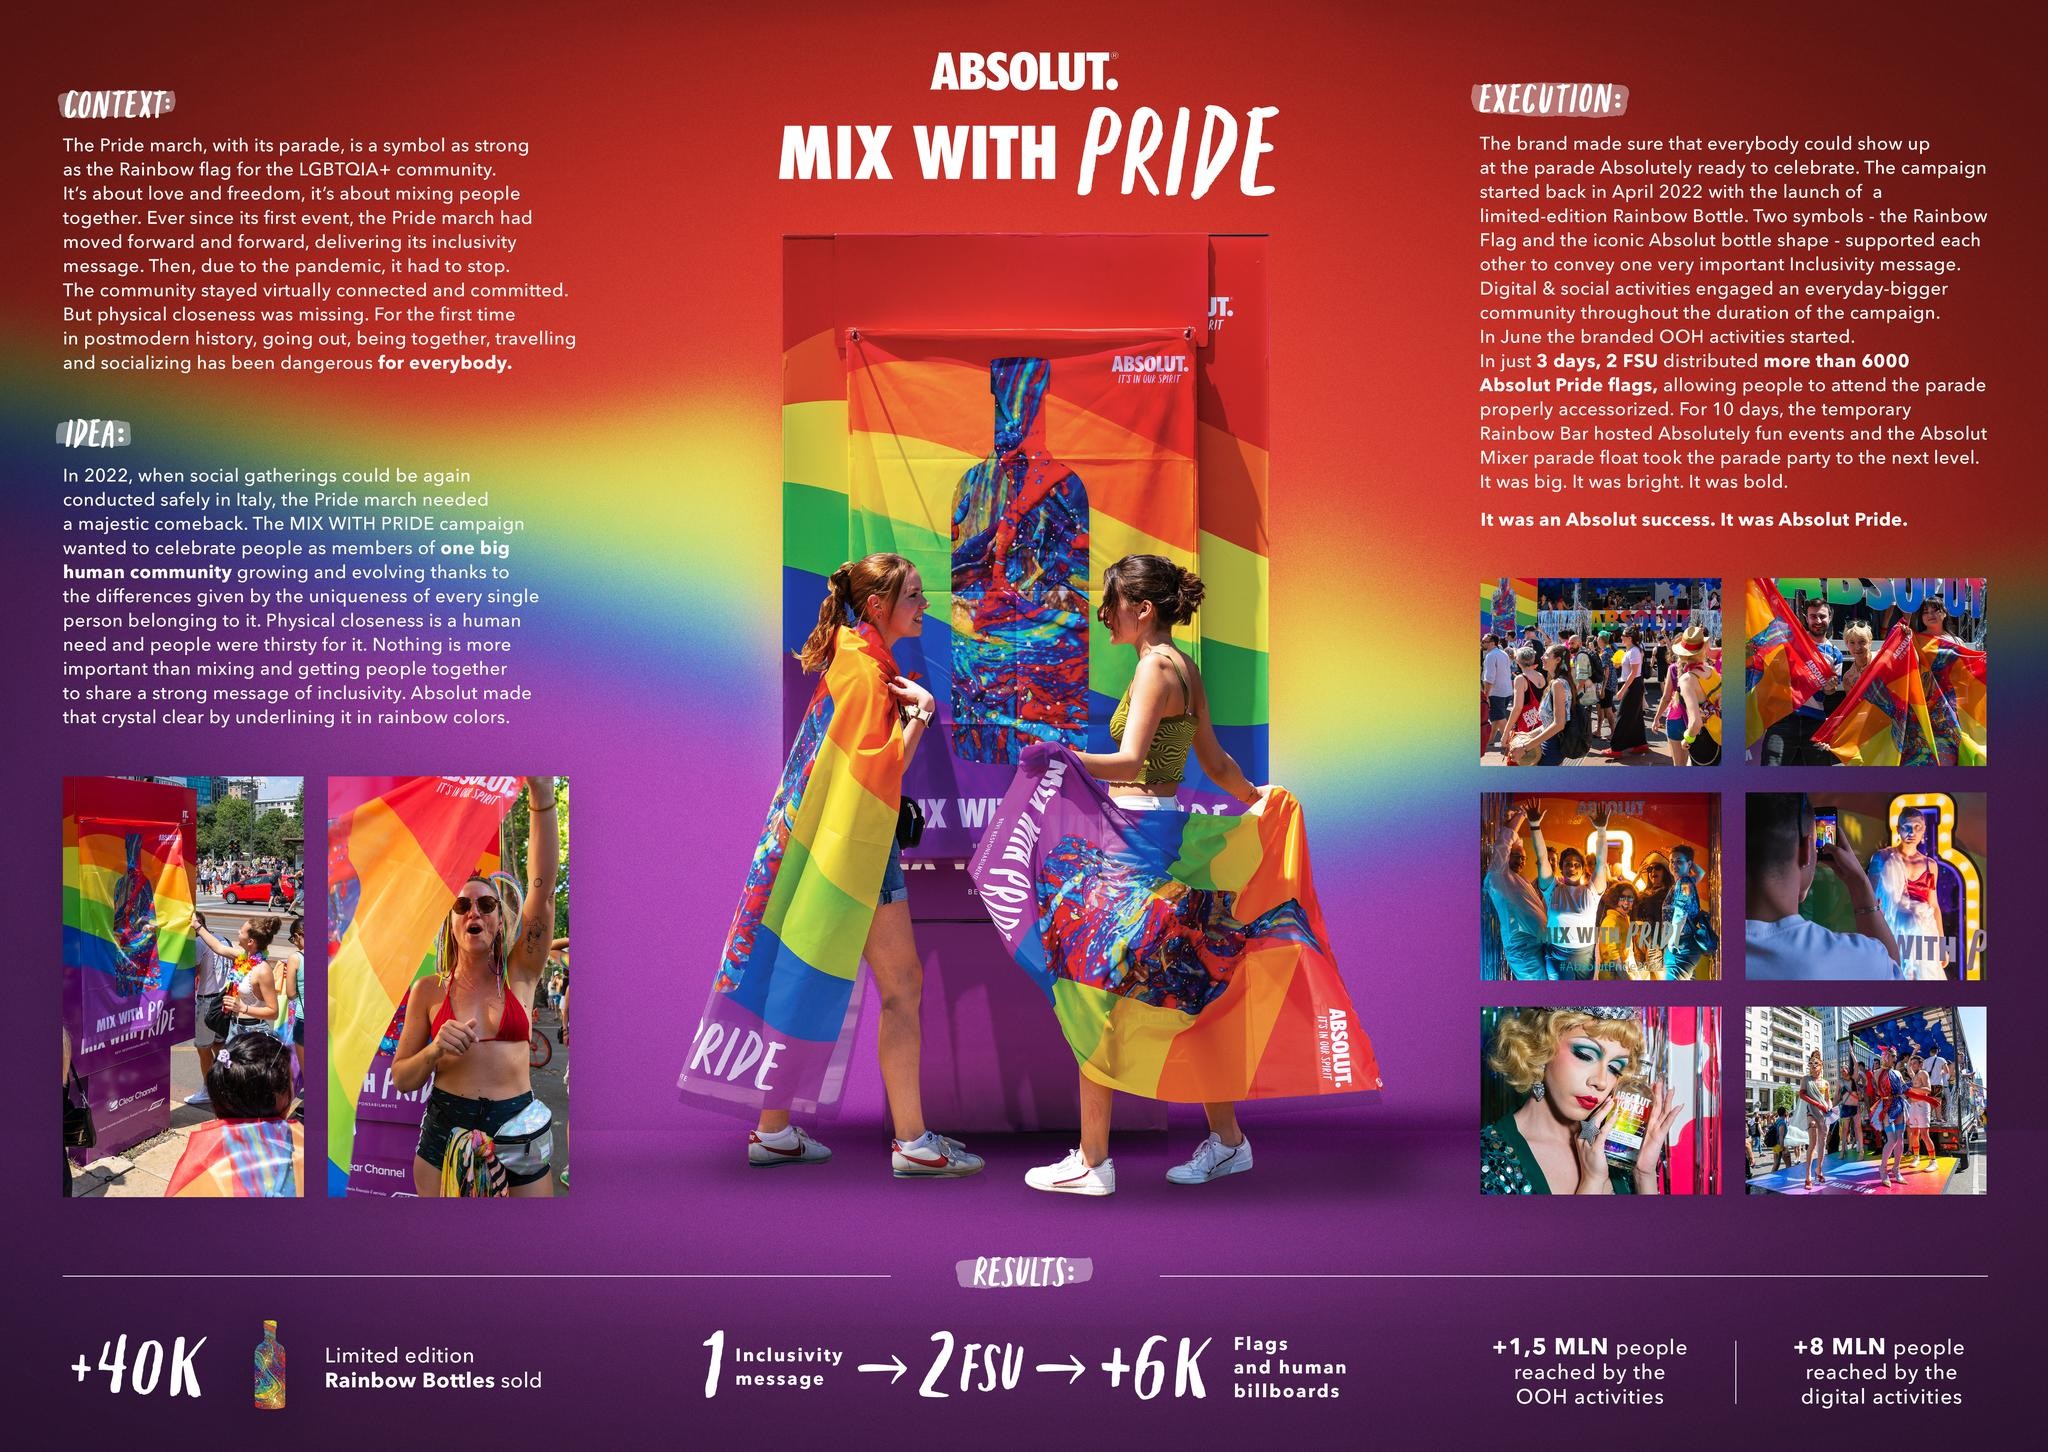 Absolut: Mix With Pride